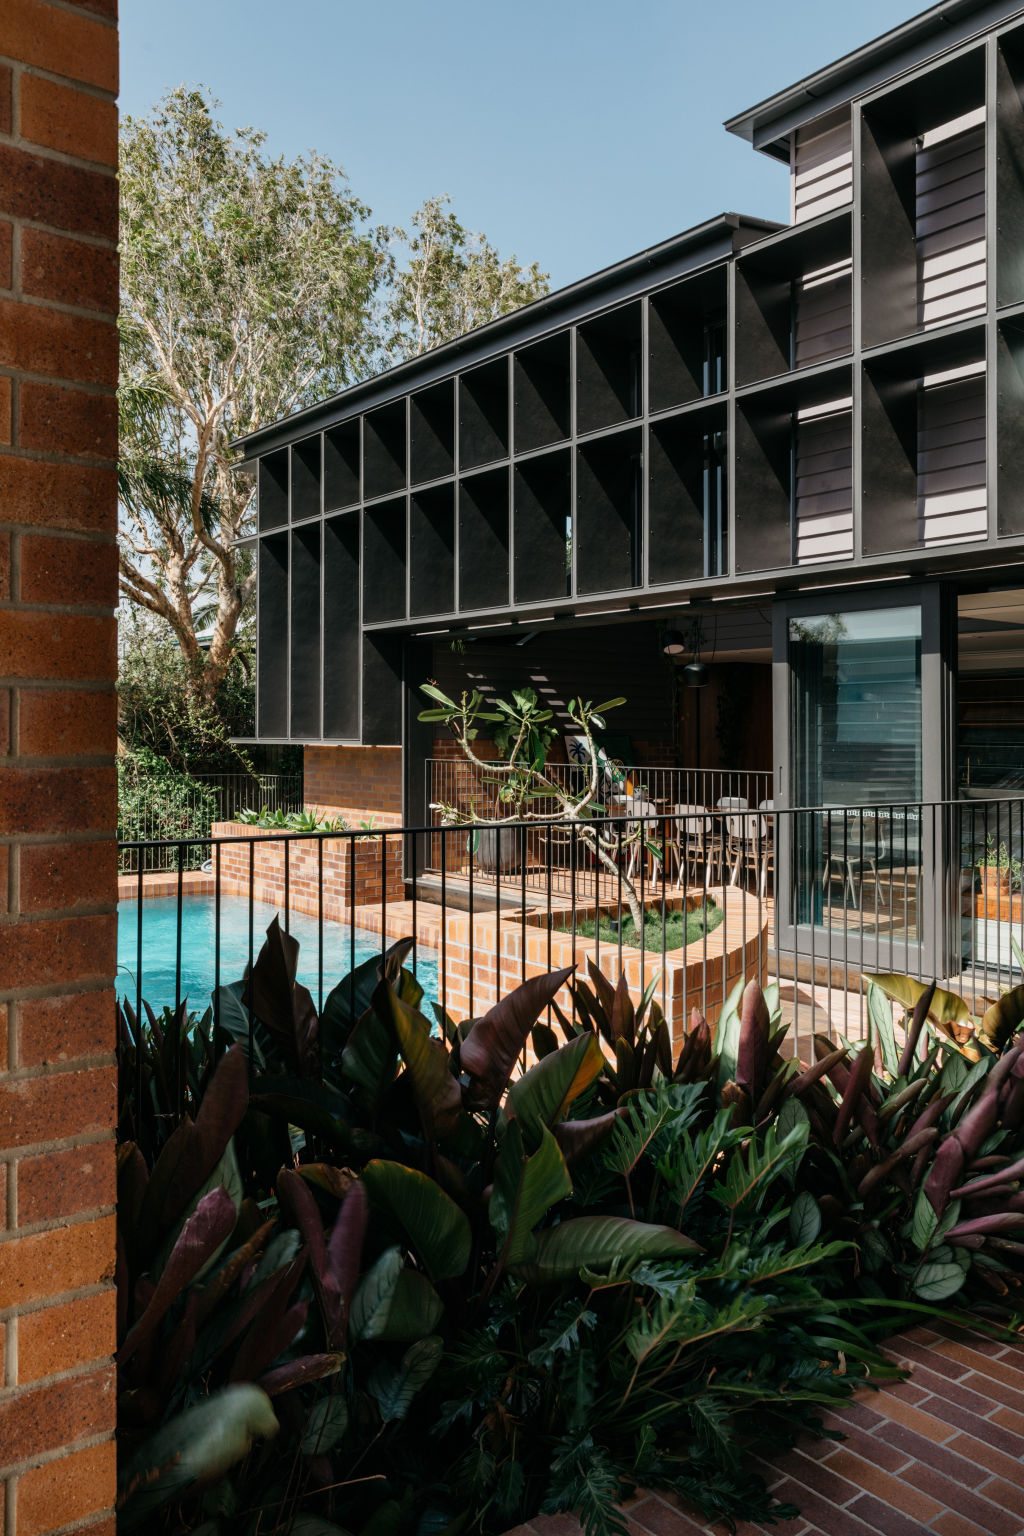 The gridded rear facade of the Wooloowin house. Photo: Shantanu Starick